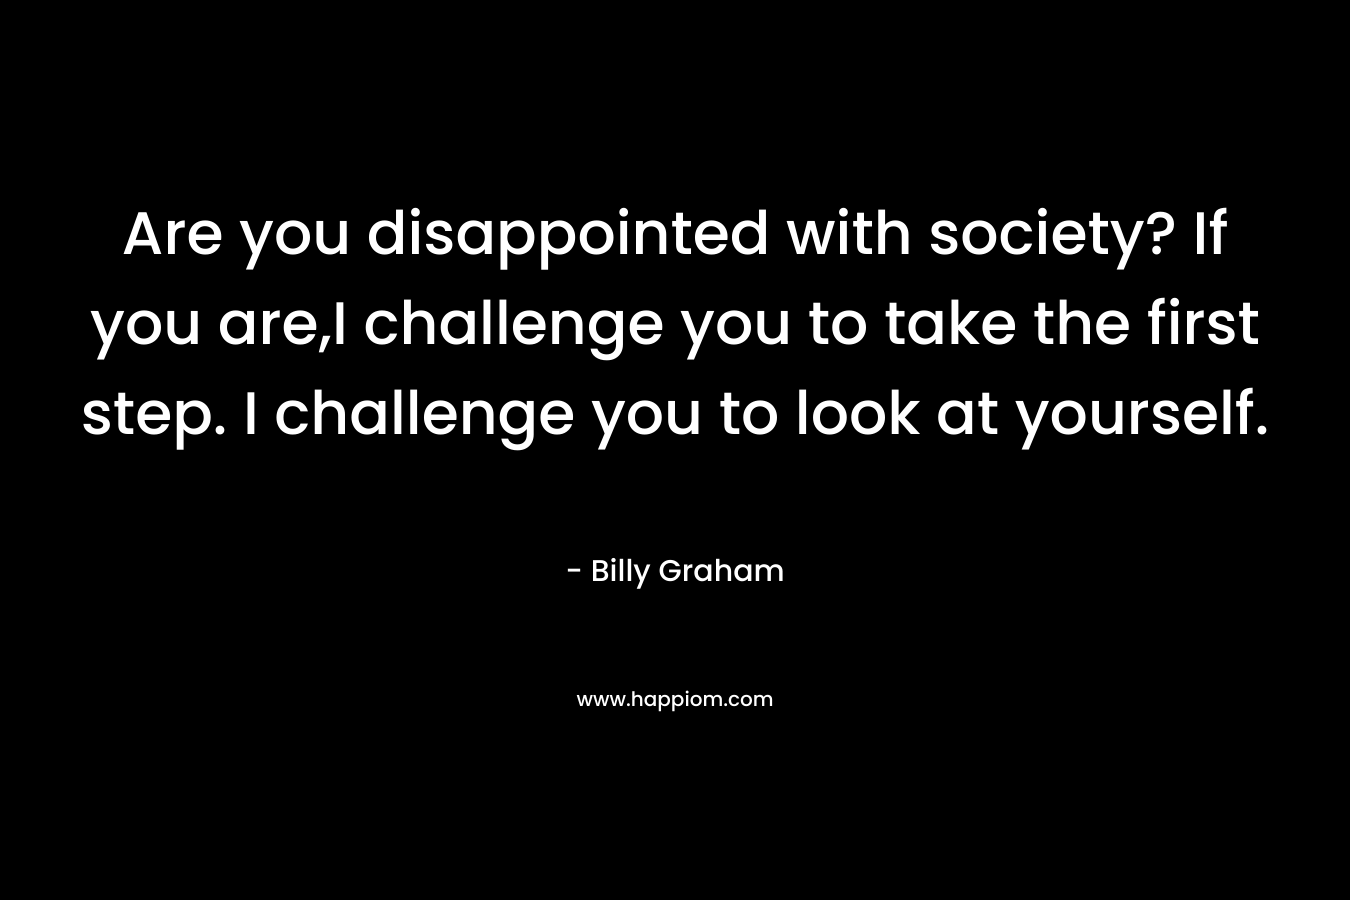 Are you disappointed with society? If you are,I challenge you to take the first step. I challenge you to look at yourself.